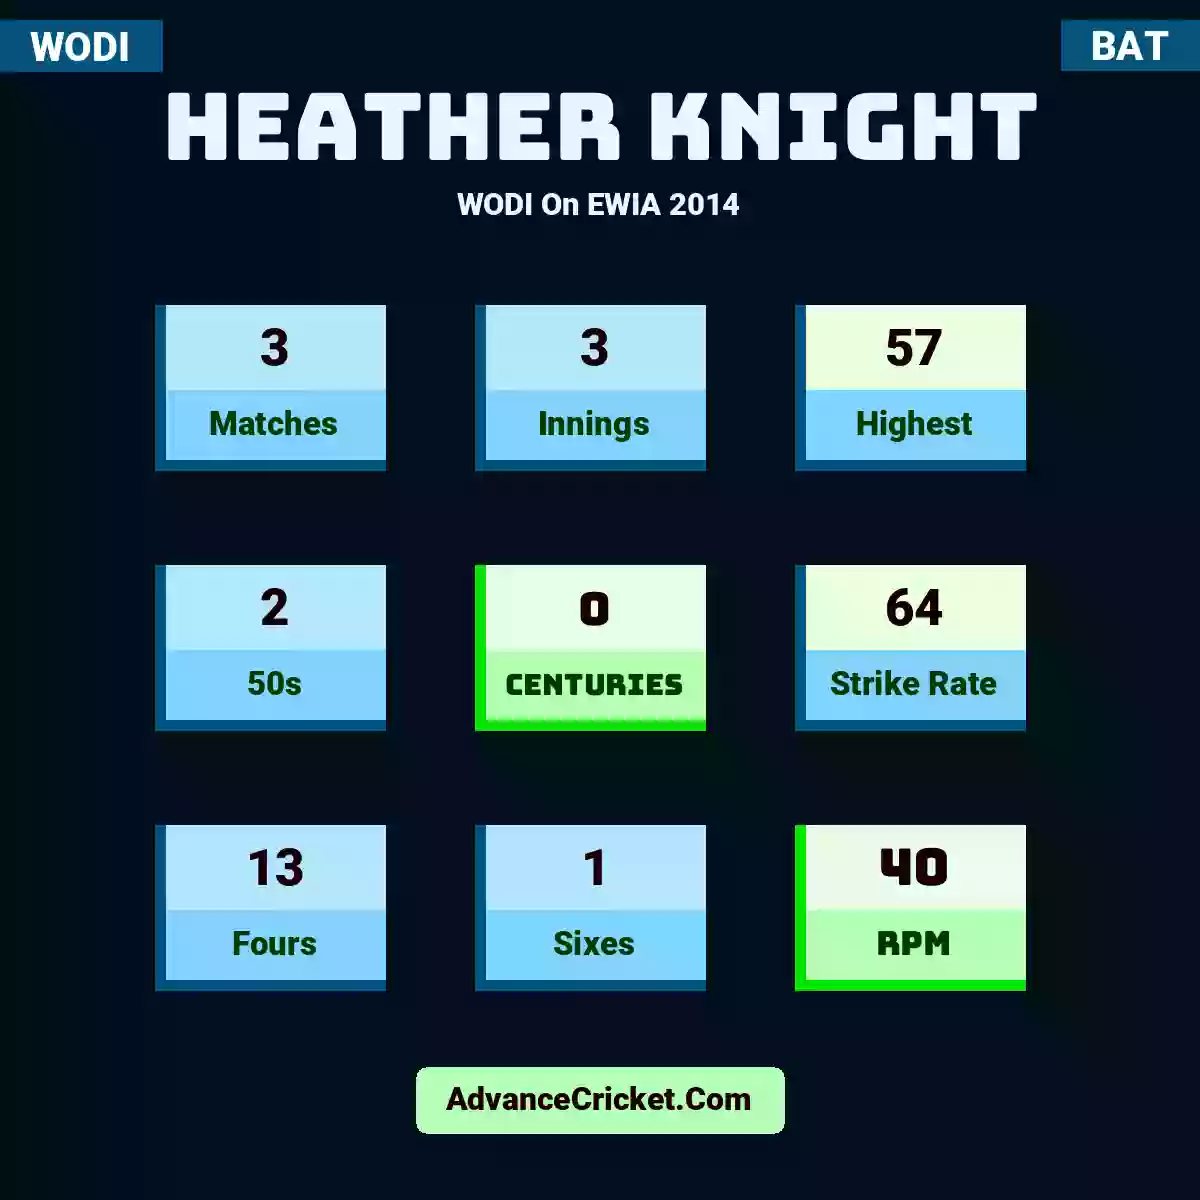 Heather Knight WODI  On EWIA 2014, Heather Knight played 3 matches, scored 57 runs as highest, 2 half-centuries, and 0 centuries, with a strike rate of 64. H.Knight hit 13 fours and 1 sixes, with an RPM of 40.